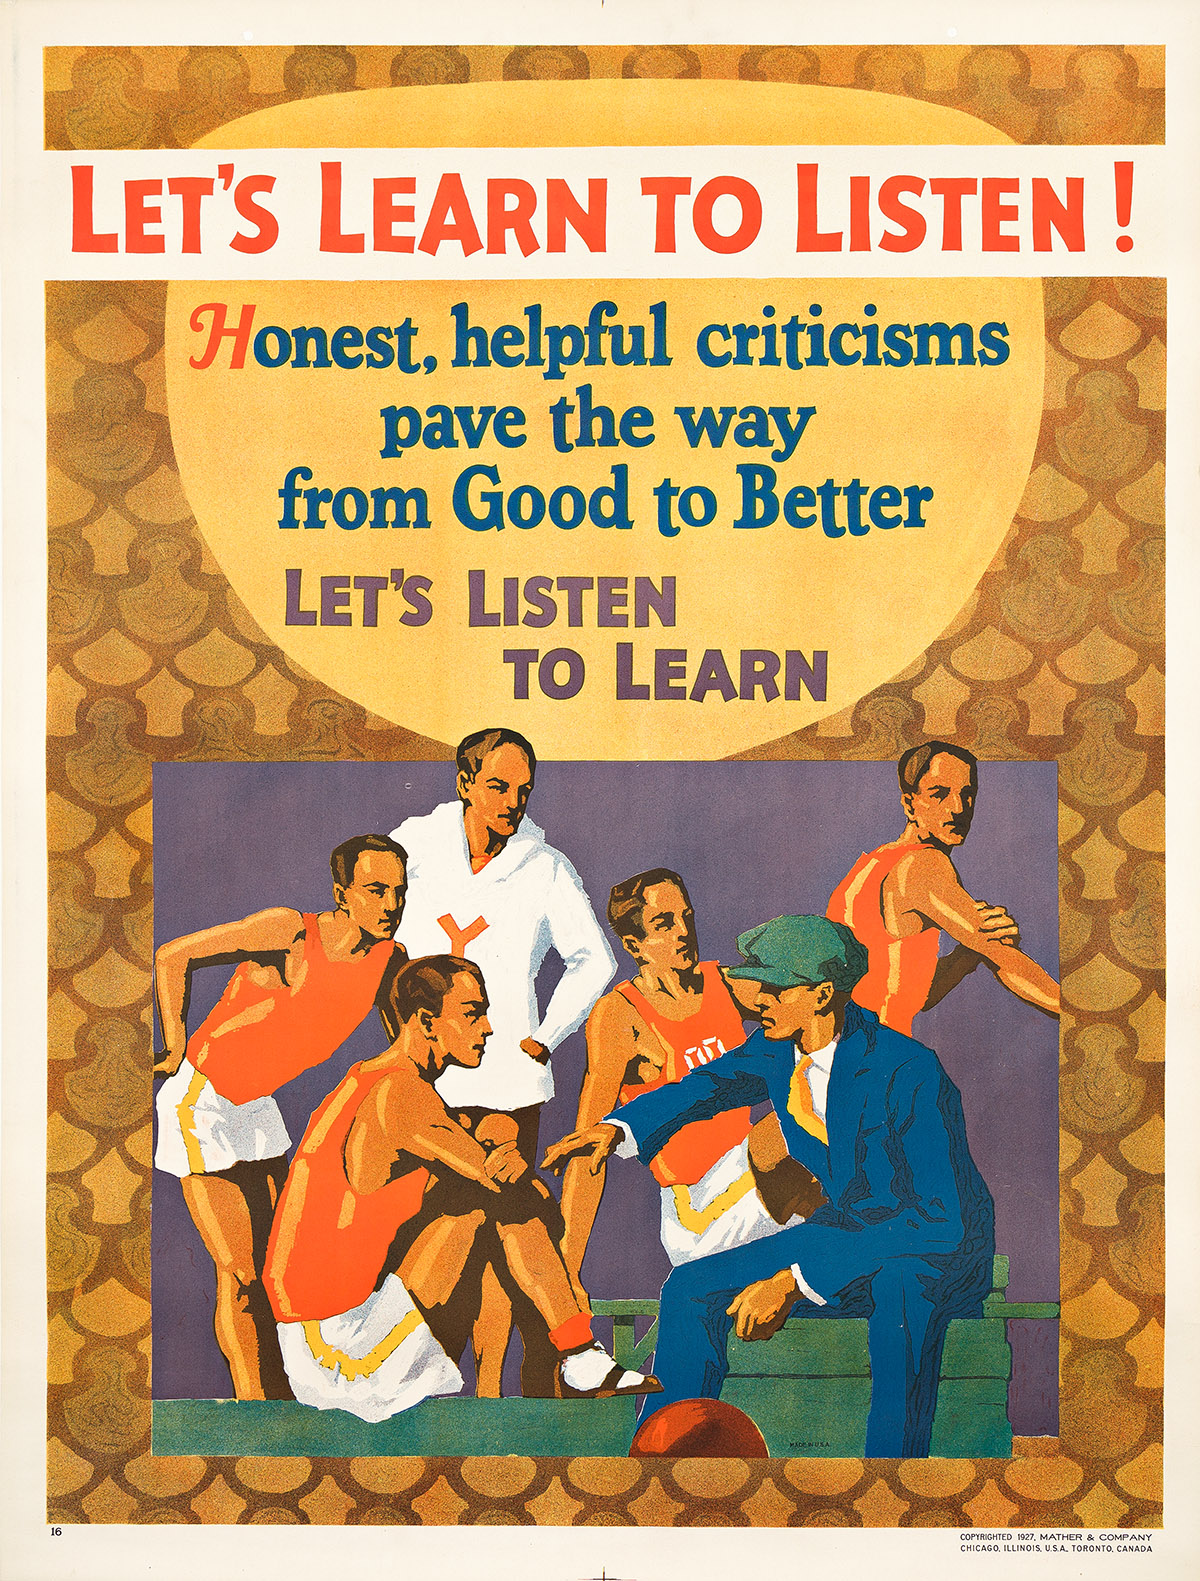 DESIGNER UNKNOWN. LETS LEARN TO LISTEN! / LETS LISTEN TO LEARN. 1927. 47¾x36 inches, 121¼x91½ cm. Mather & Company, Chicago.